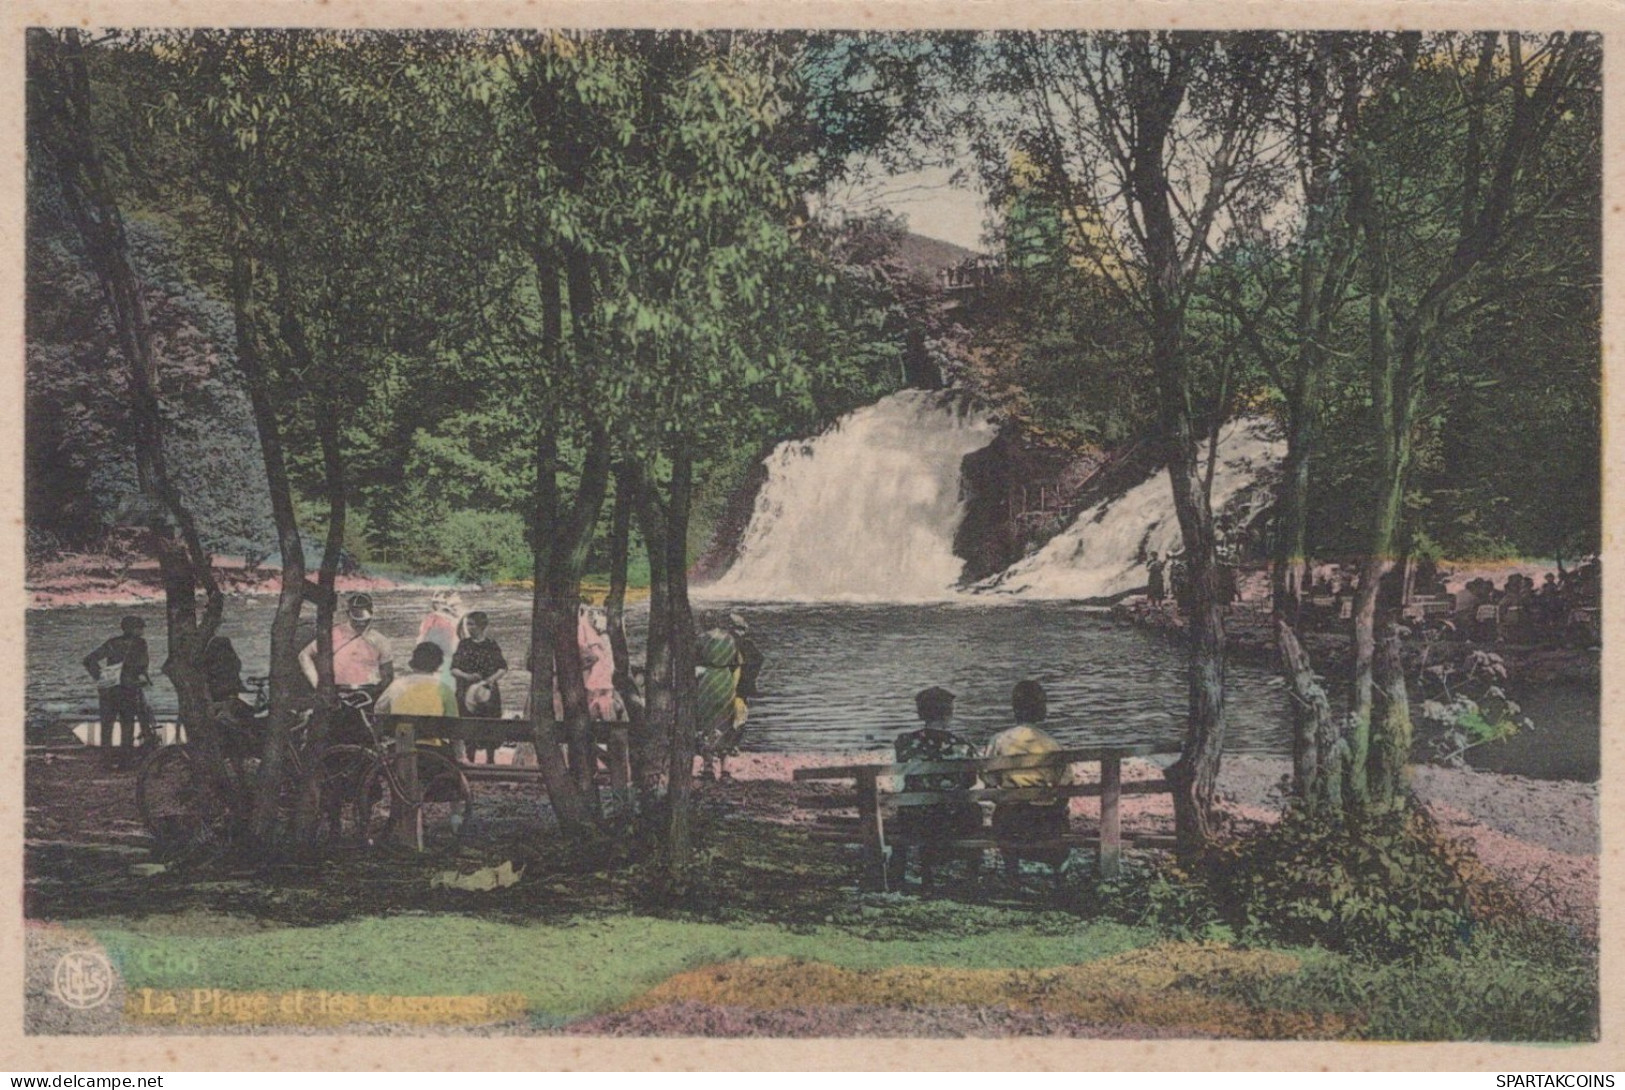 BELGIUM COO WATERFALL Province Of Liège Postcard CPA Unposted #PAD026.A - Stavelot